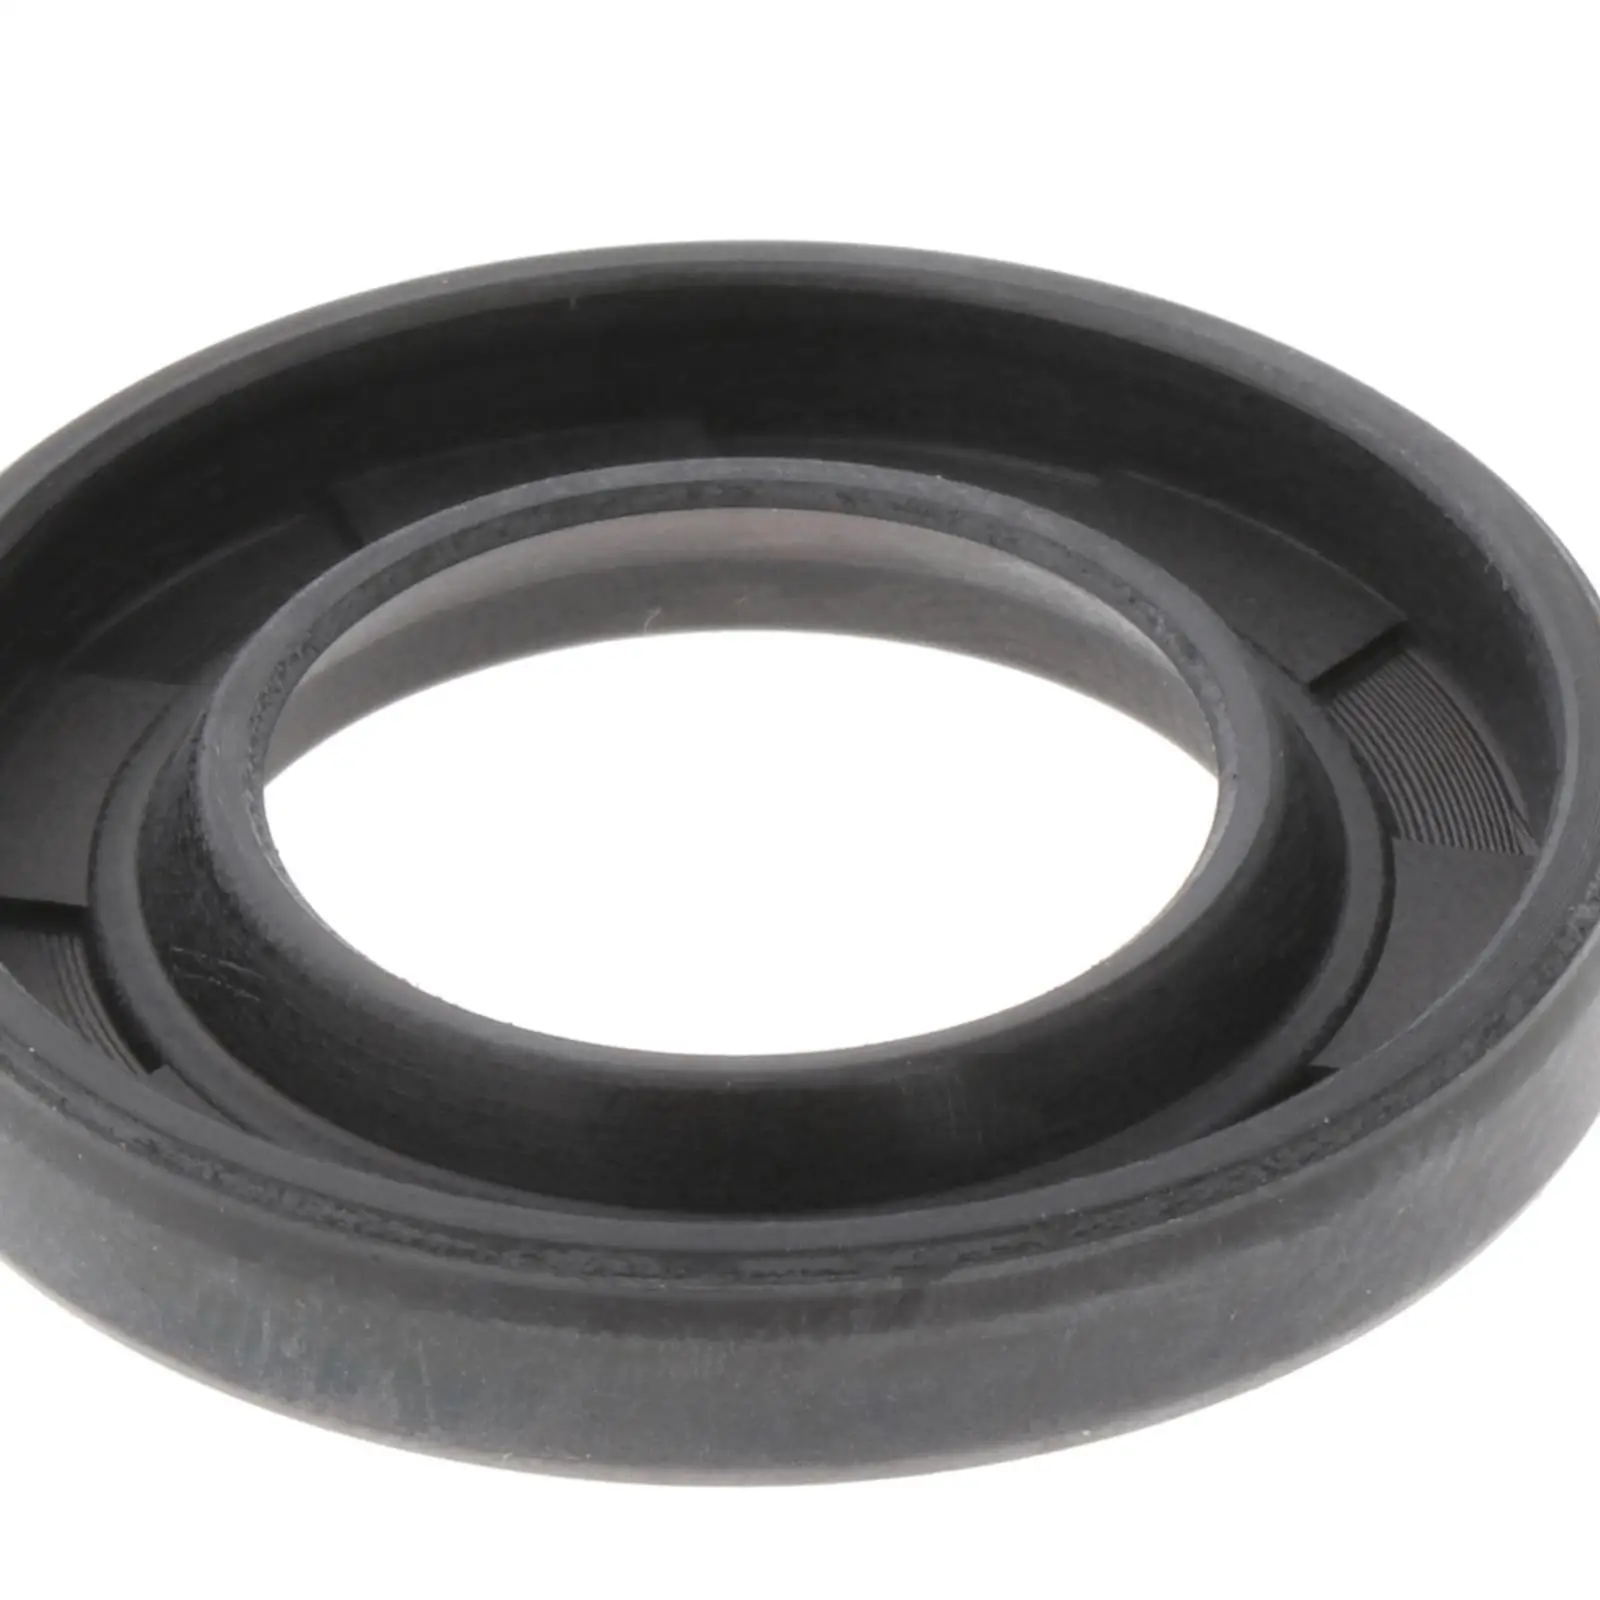 Marine Oil Seal Direct Replaces Fit for Outboard Motor 60HP 70HP